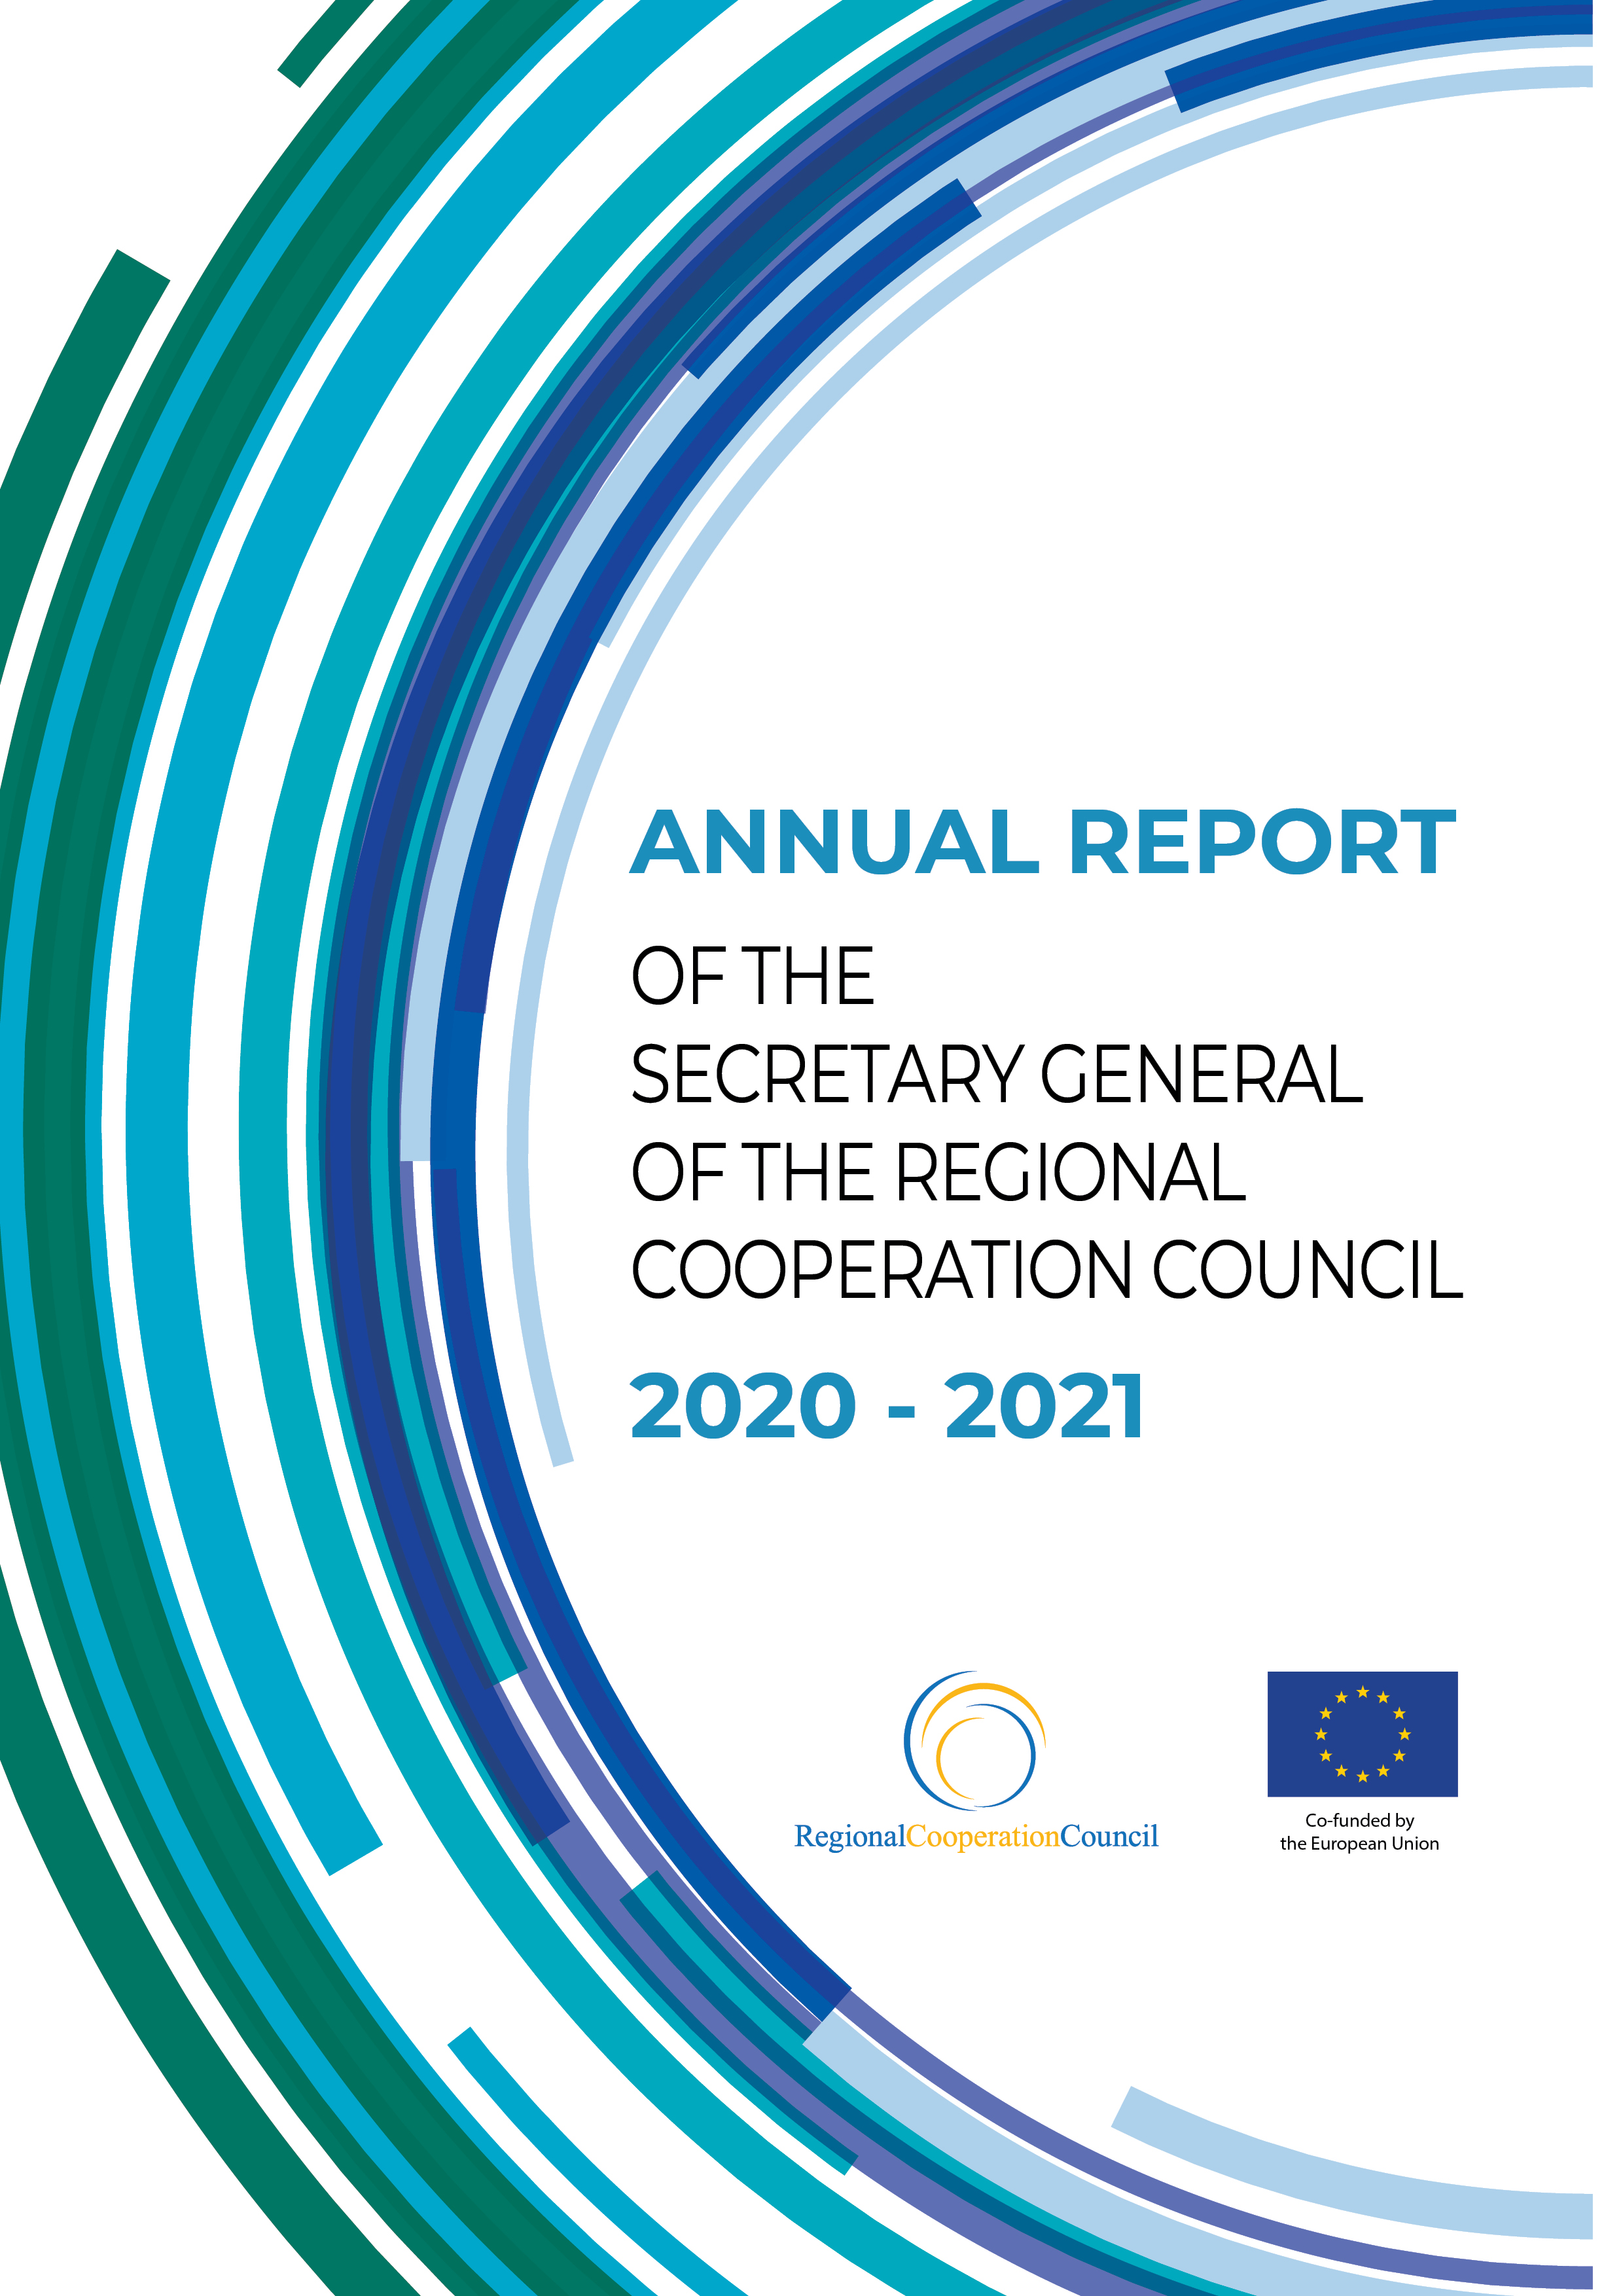 Annual Report of the Secretary General of the Regional Cooperation Council 2020-2021